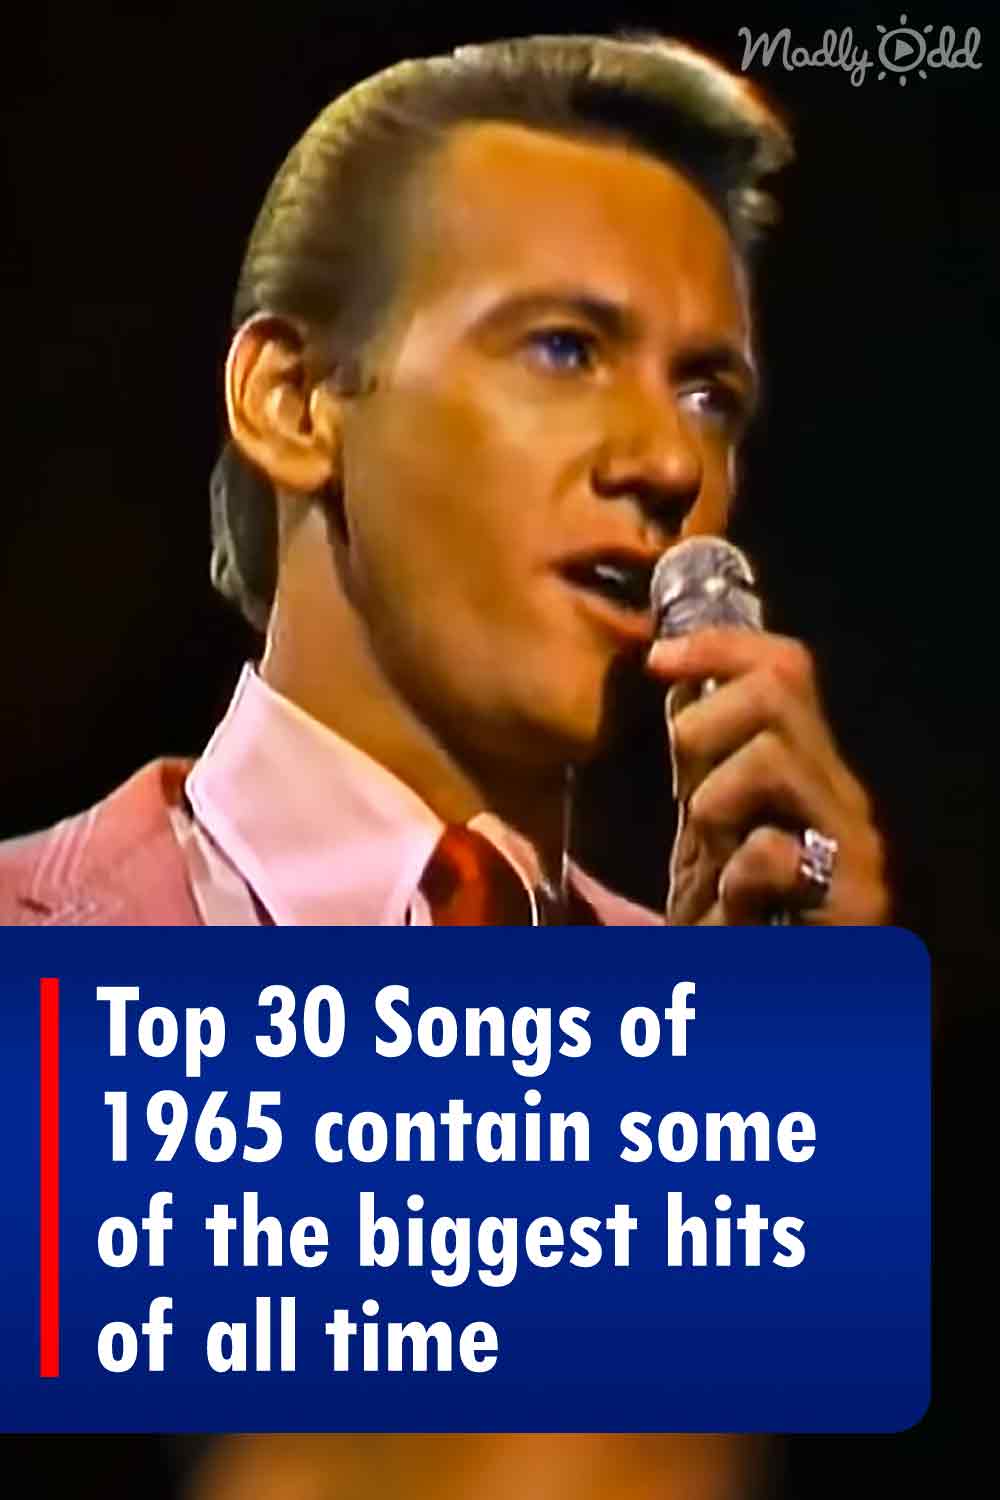 Top 30 Songs of 1965 contain some of the biggest hits of all time ...